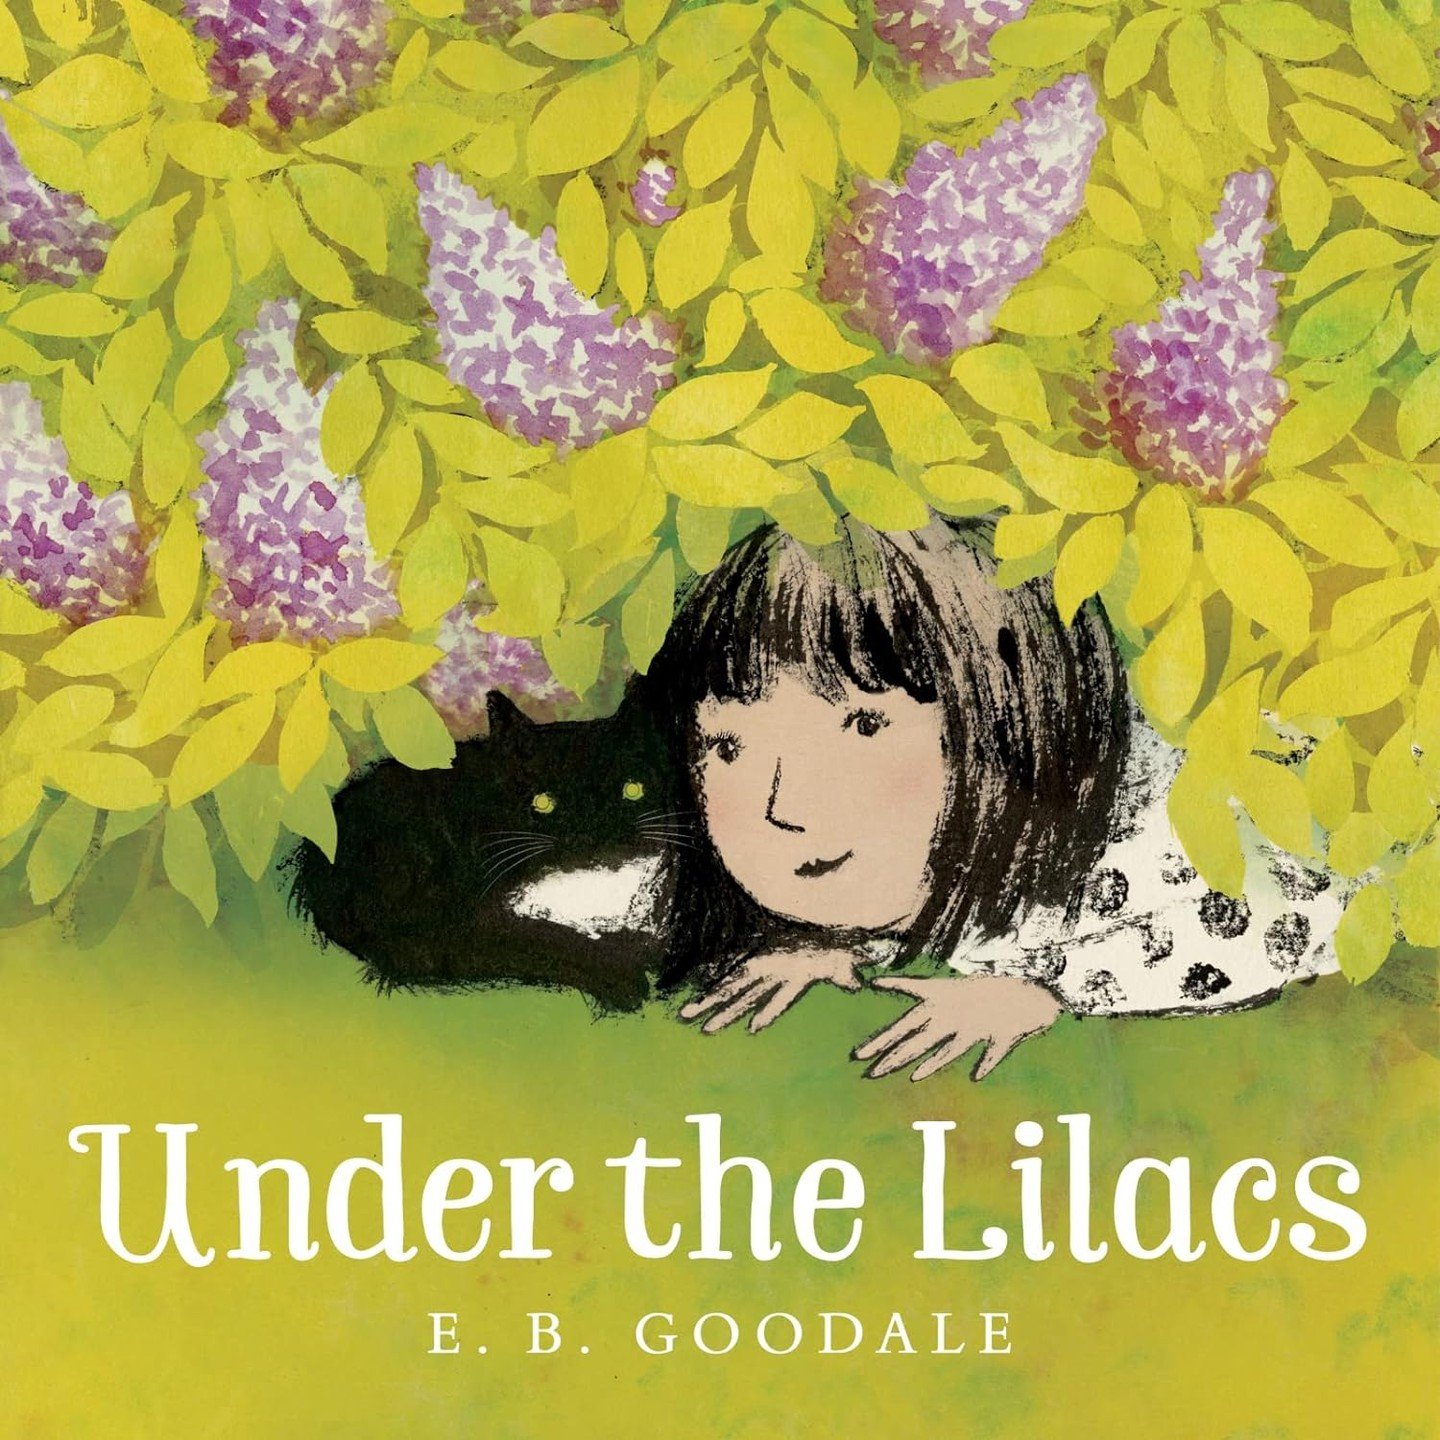 Lilac season is here, and it's time for one of my favorite books - which is also a lovely one to share in anticipation of Mother's Day 📖 The beautiful stories that @ebgoodale has created and shared with the world elevate any bookshelf. More in the L